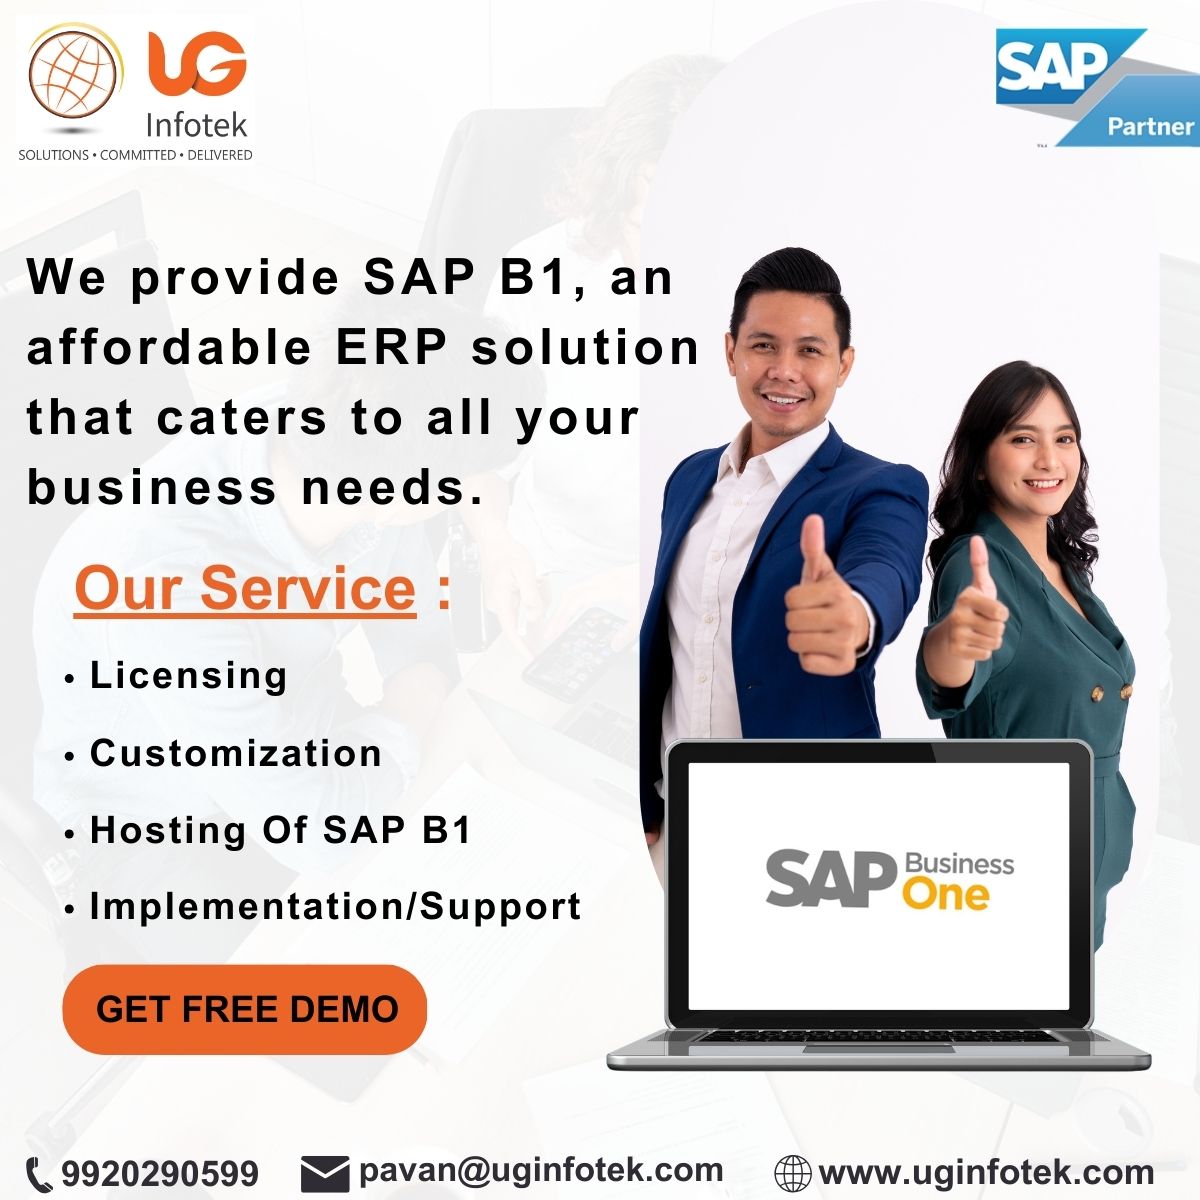 Boost Your Business Productivity with SAP B1: The Smart Choice for SMEs by UG Infotek LLP We'll Be Happy to Help You Manage Your Business Better and Grow Further with 𝗦𝗔𝗣 𝗕𝘂𝘀𝗶𝗻𝗲𝘀𝘀 𝗢𝗻𝗲. #sapbusinessone #inventorymanagement #affordableprice #uginfotekllp #sapb1 #ERP